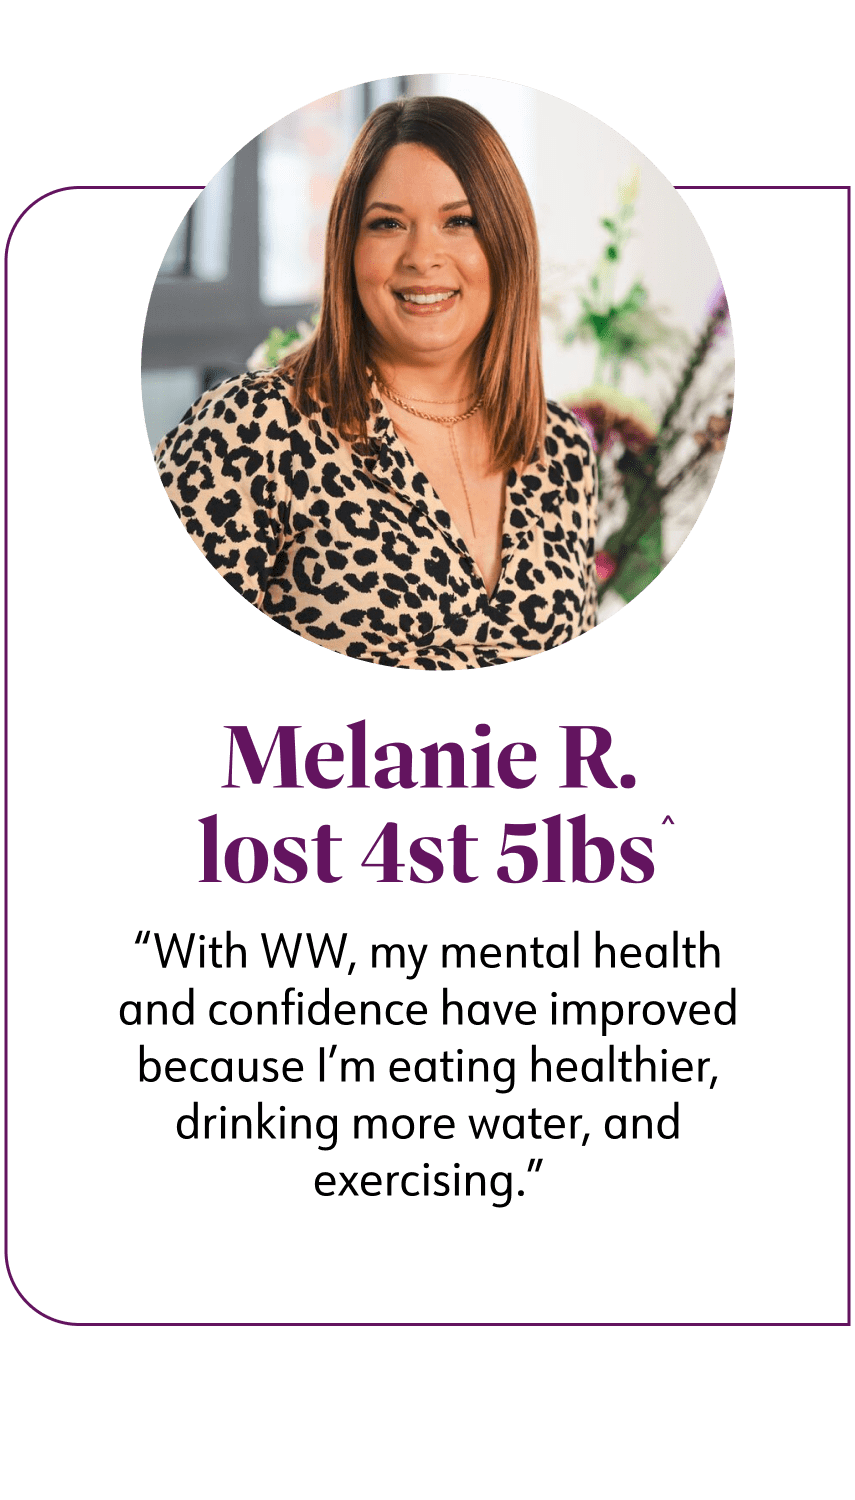 Melanie R, WW member after 4st 5lbs weight loss